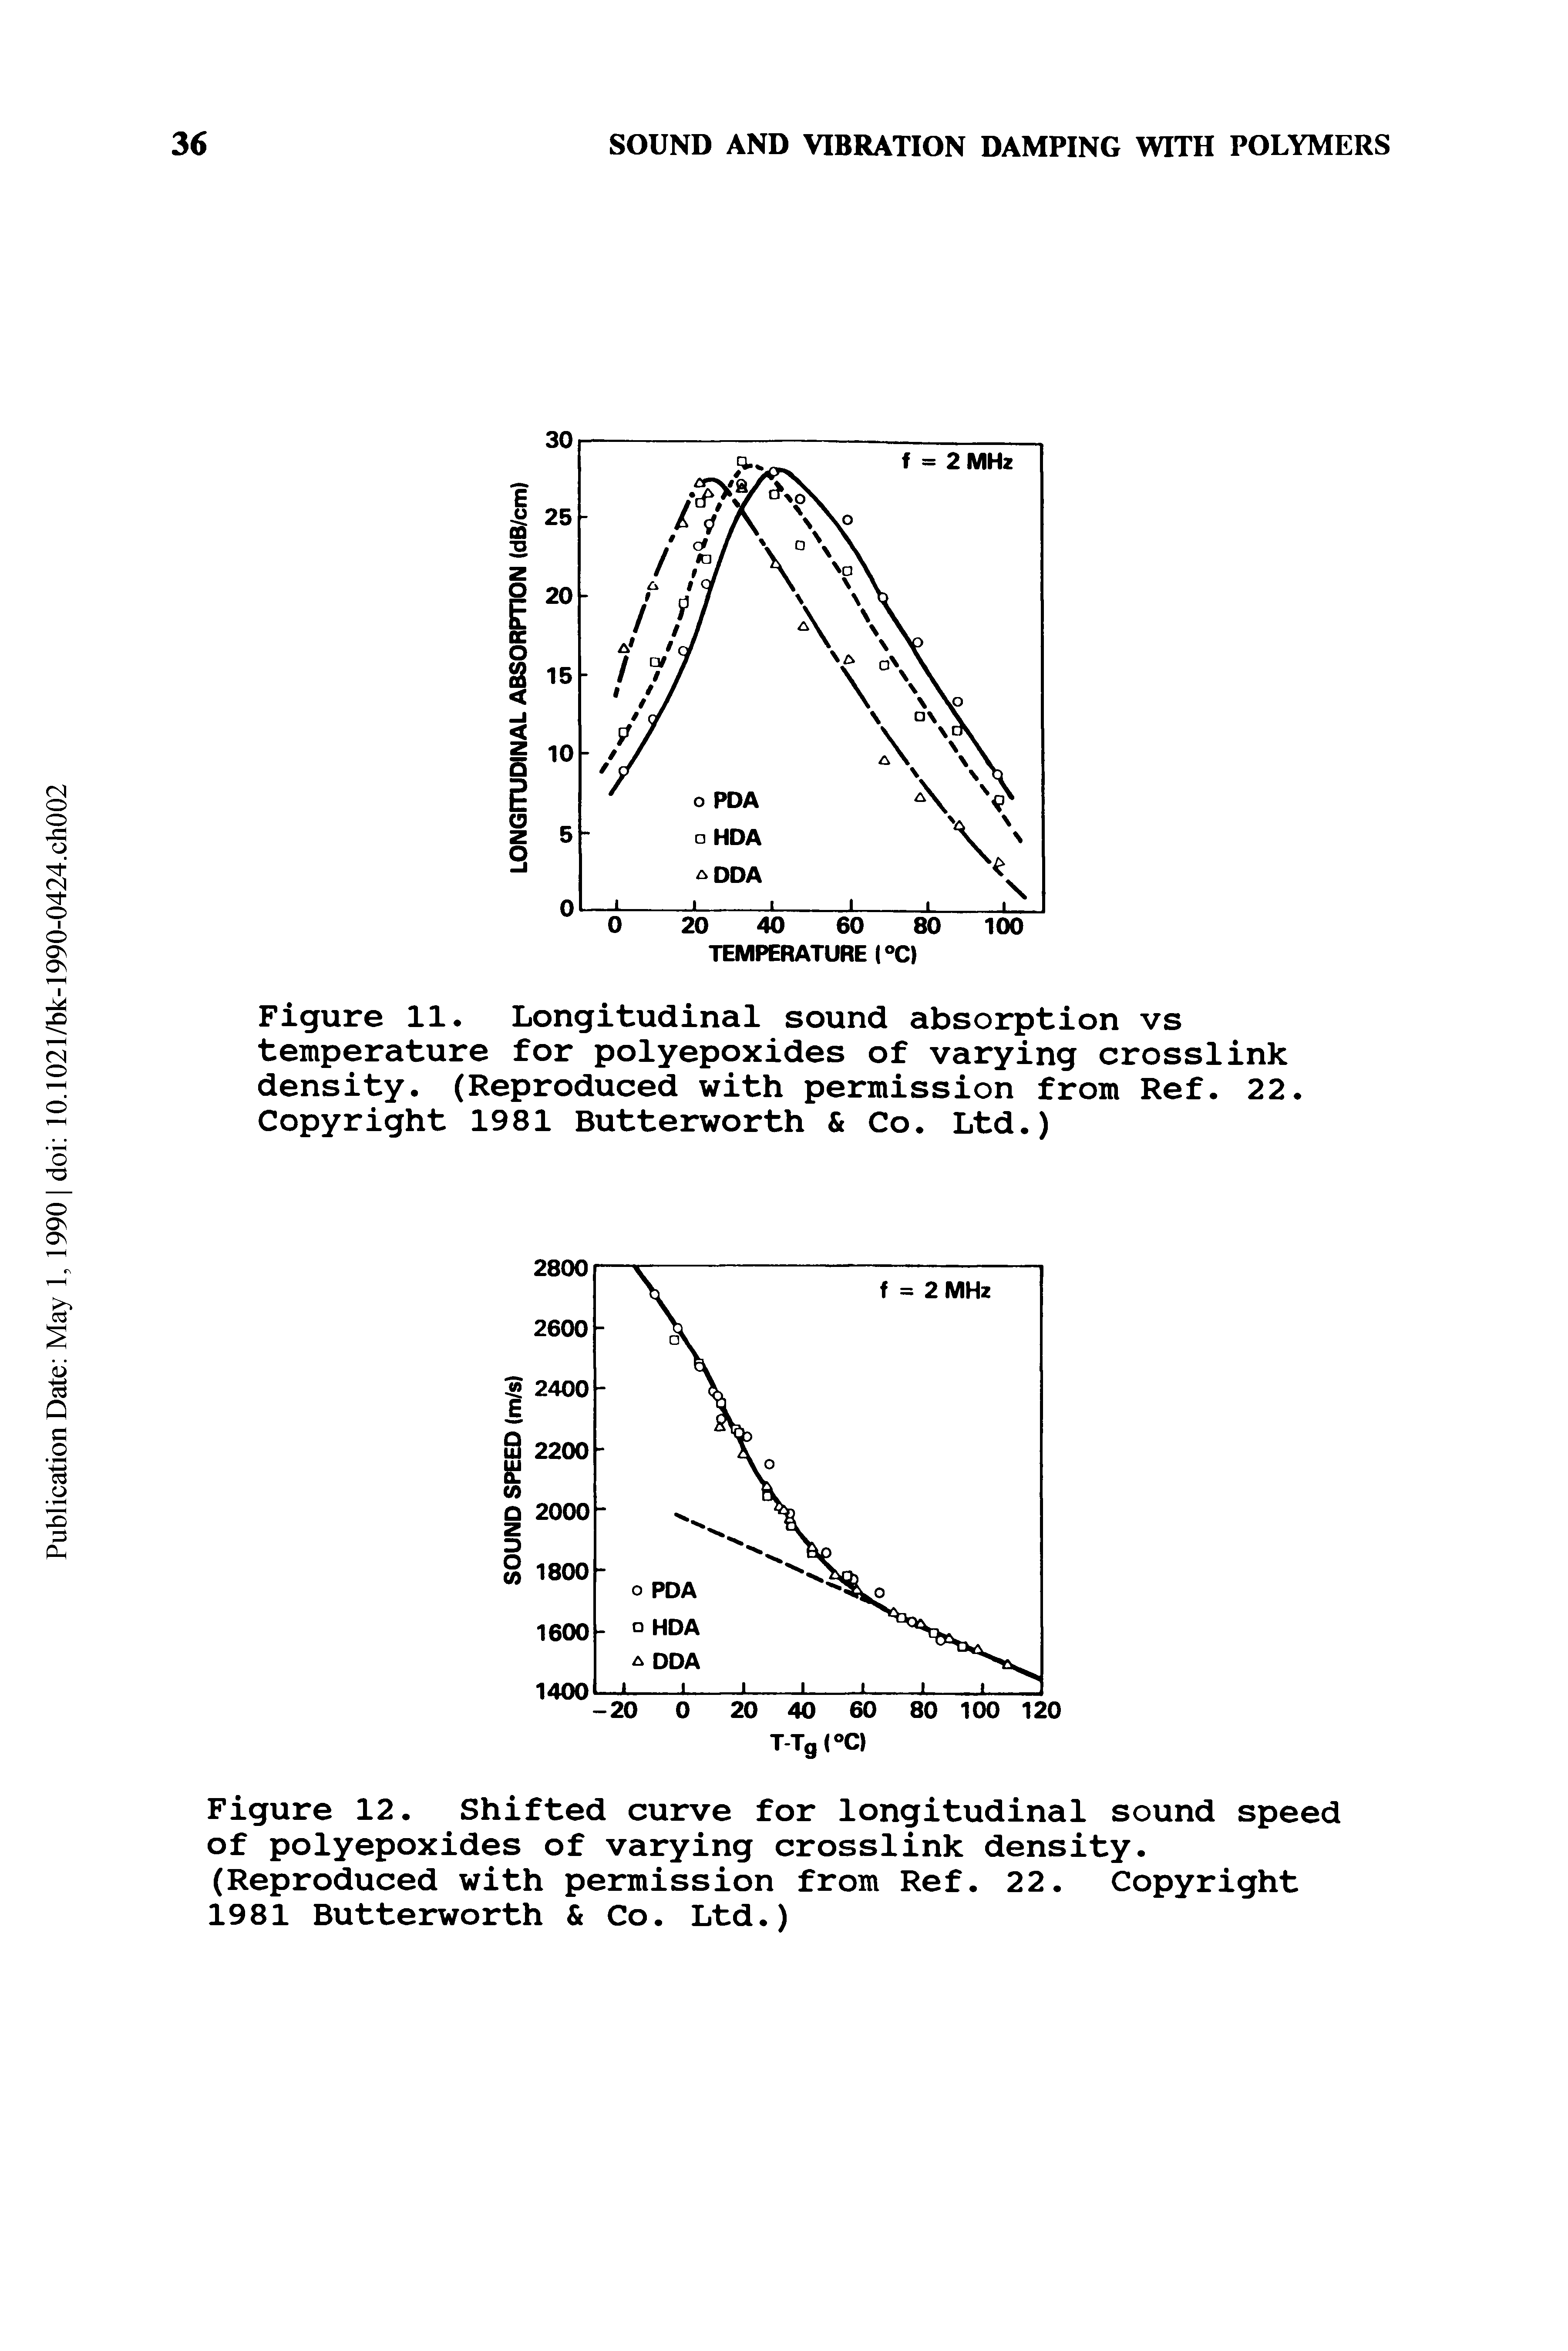 Figure 12. Shifted curve for longitudinal sound speed of polyepoxides of varying crosslink density. (Reproduced with permission from Ref. 22. Copyright 1981 Butterworth Co. Ltd.)...